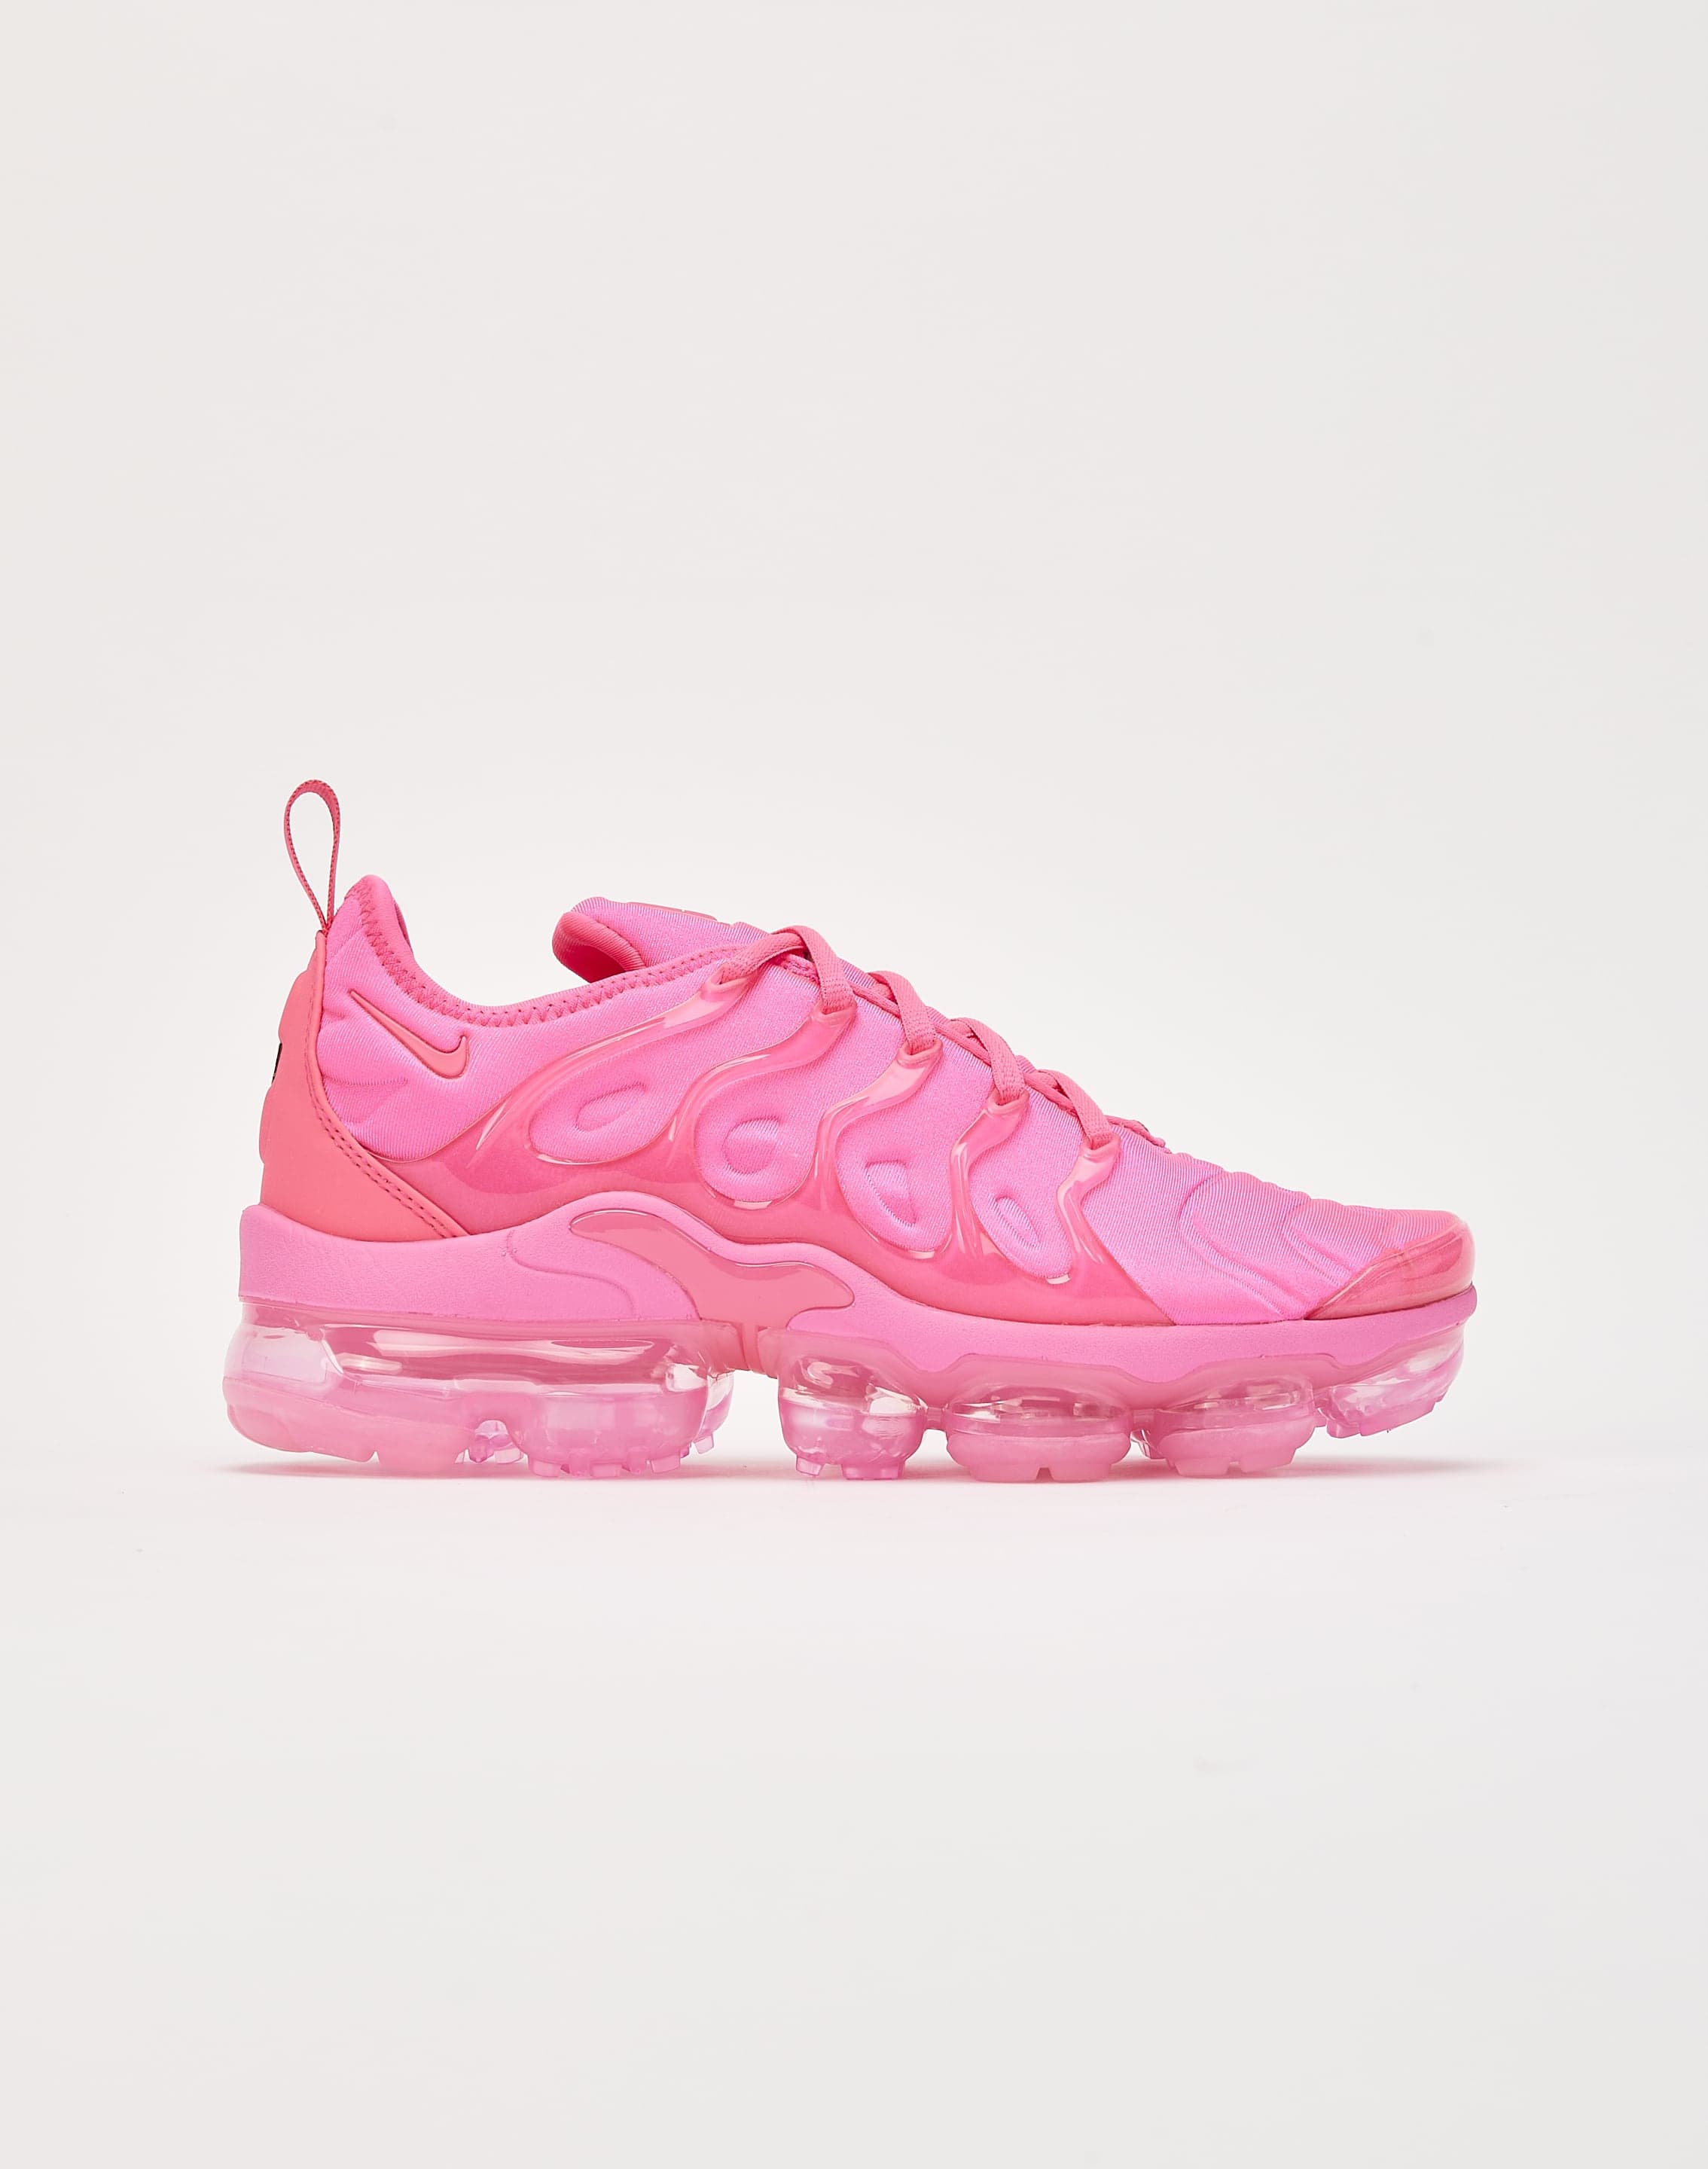 Plante tofu reference Nike Air VaporMax Plus – DTLR